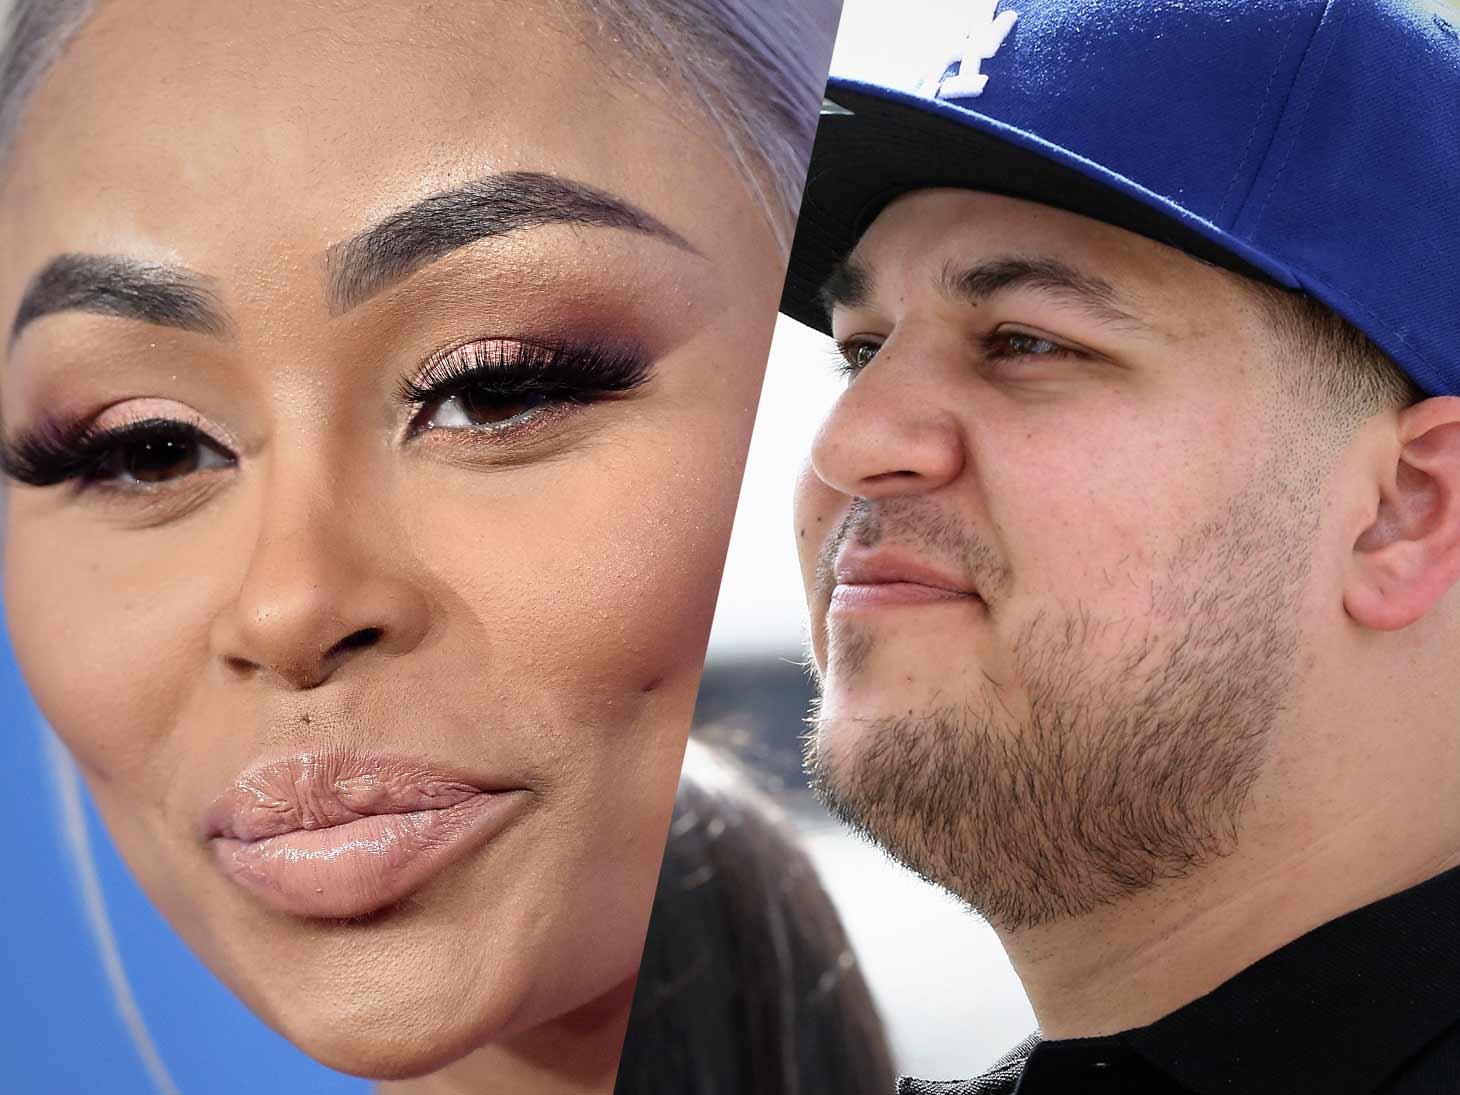 Rob Kardashian Reveals He Was Forced to Hire Security to Protect Himself Following Blac Chyna’s ‘Violent Attack’